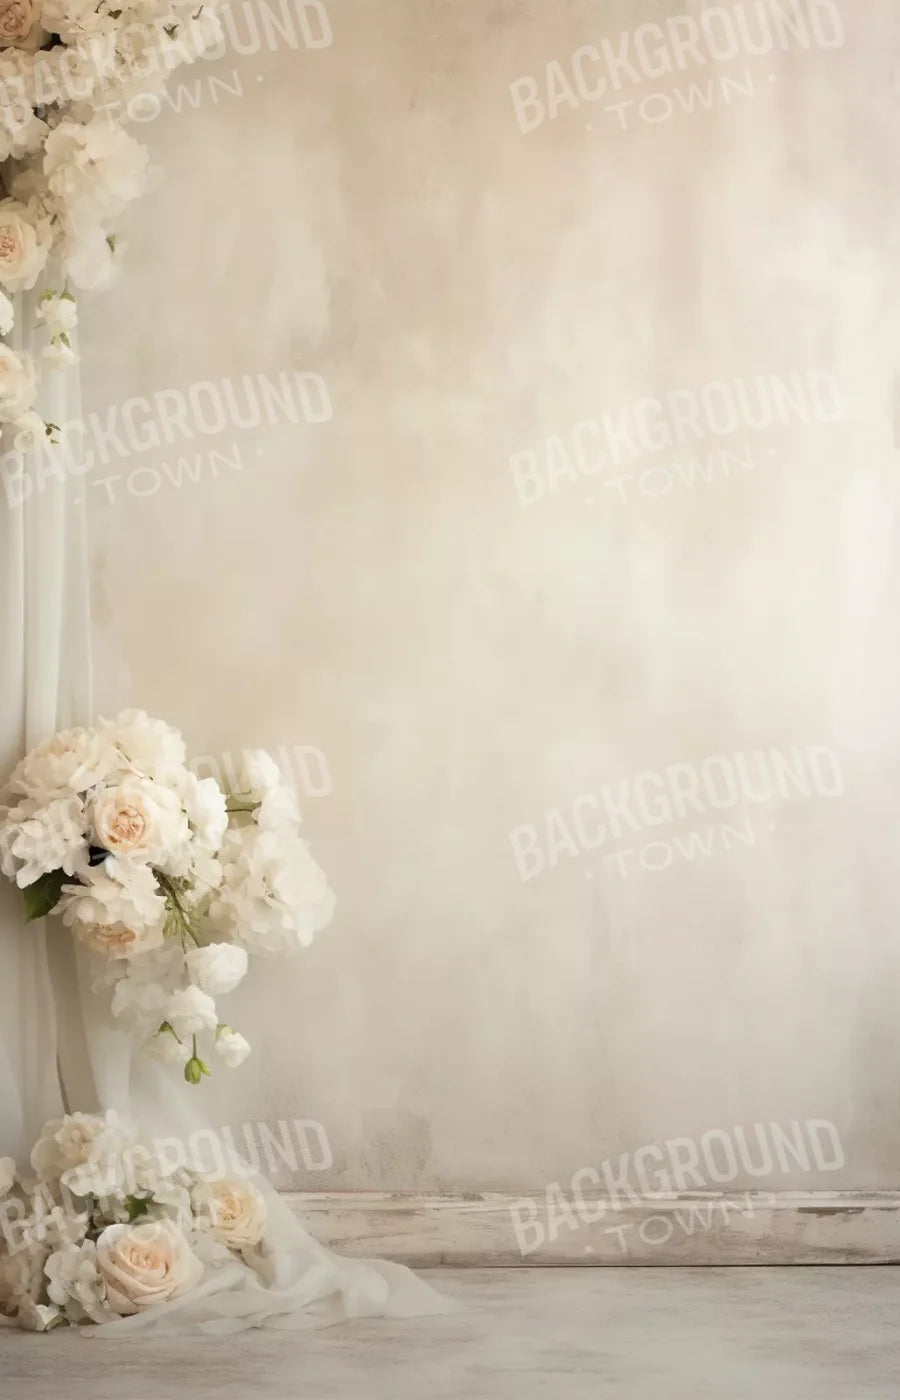 Plaster Wall With Florals 9’X14’ Ultracloth (108 X 168 Inch) Backdrop